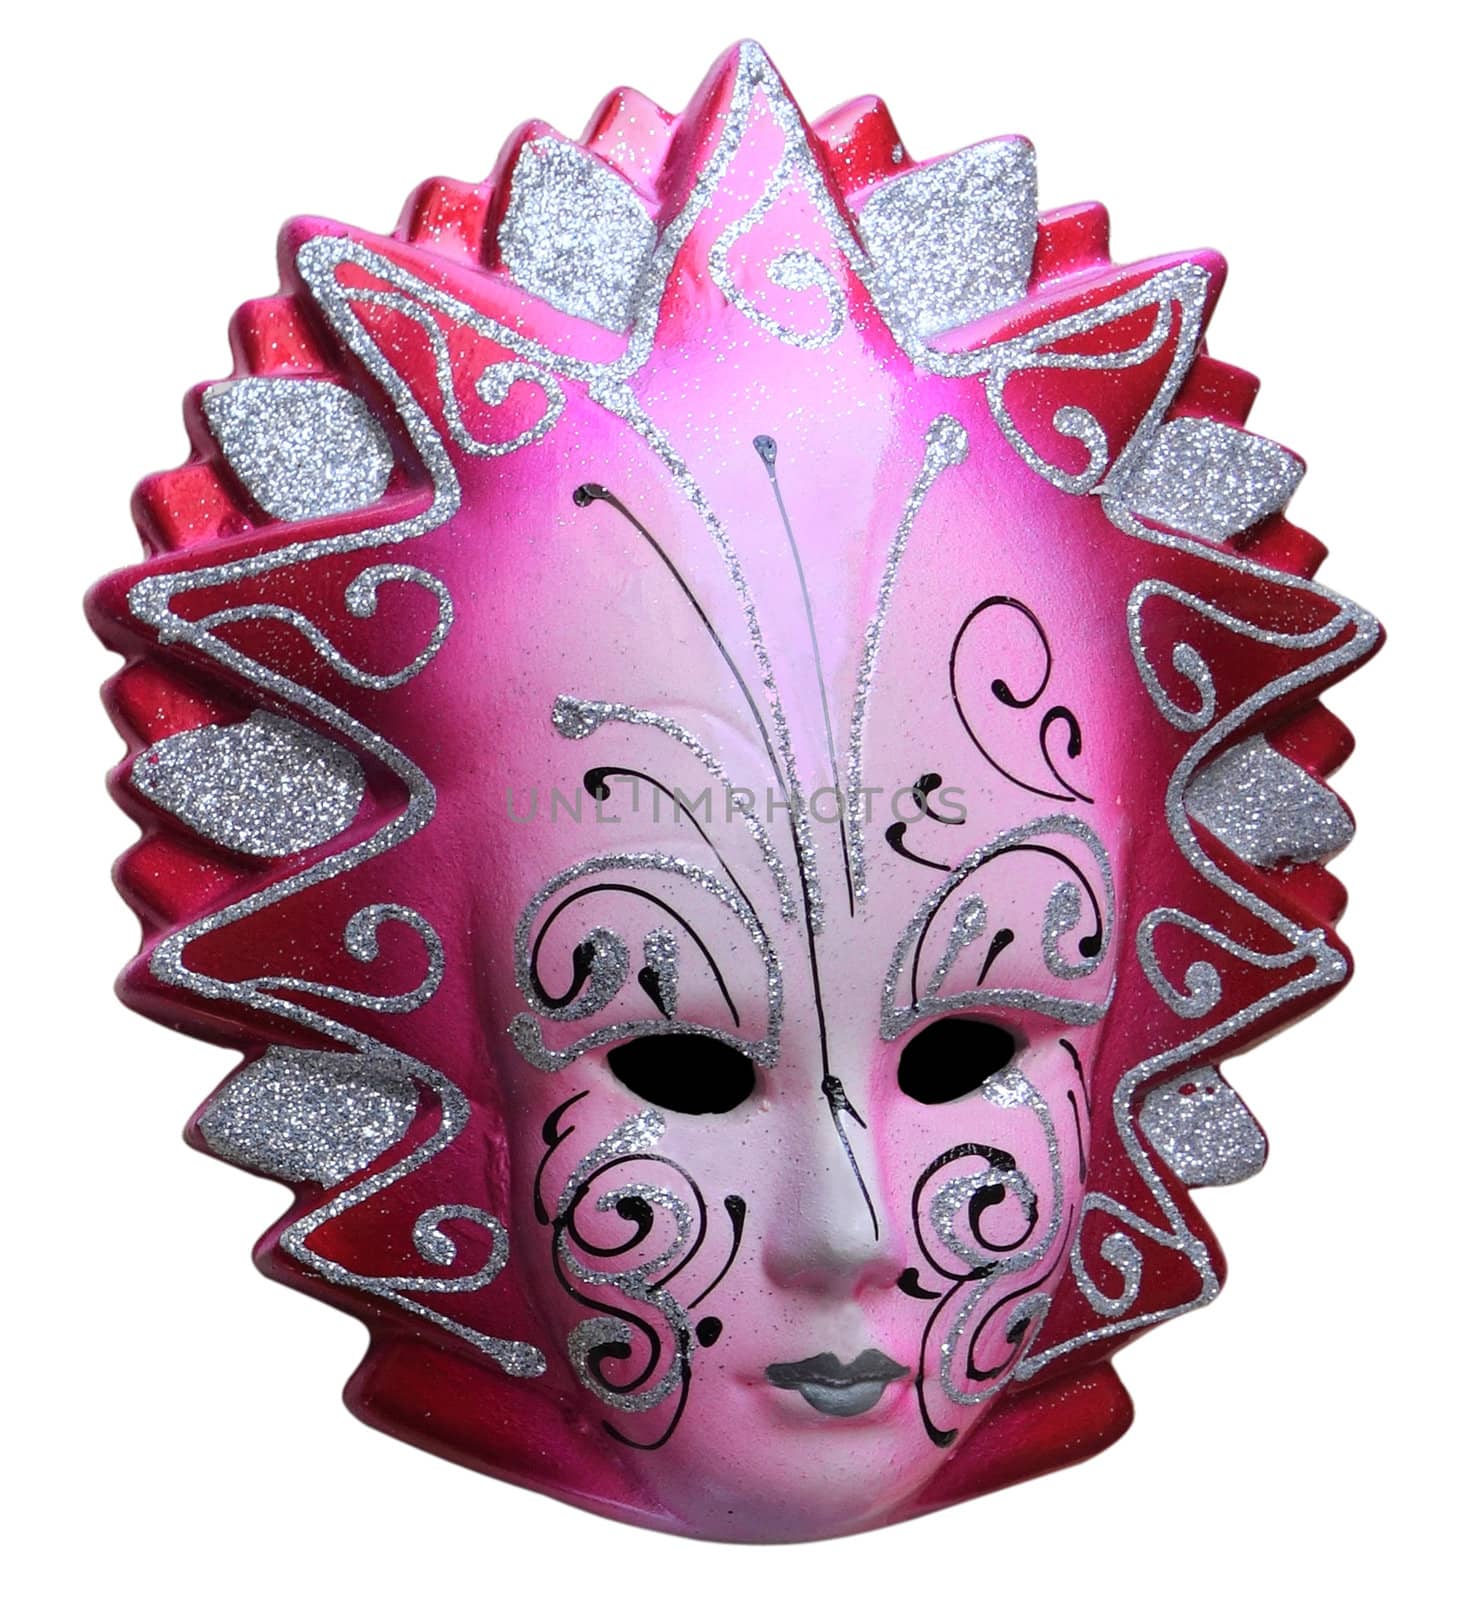 Image of a characterisitc Venetian mask isolated against a white background.